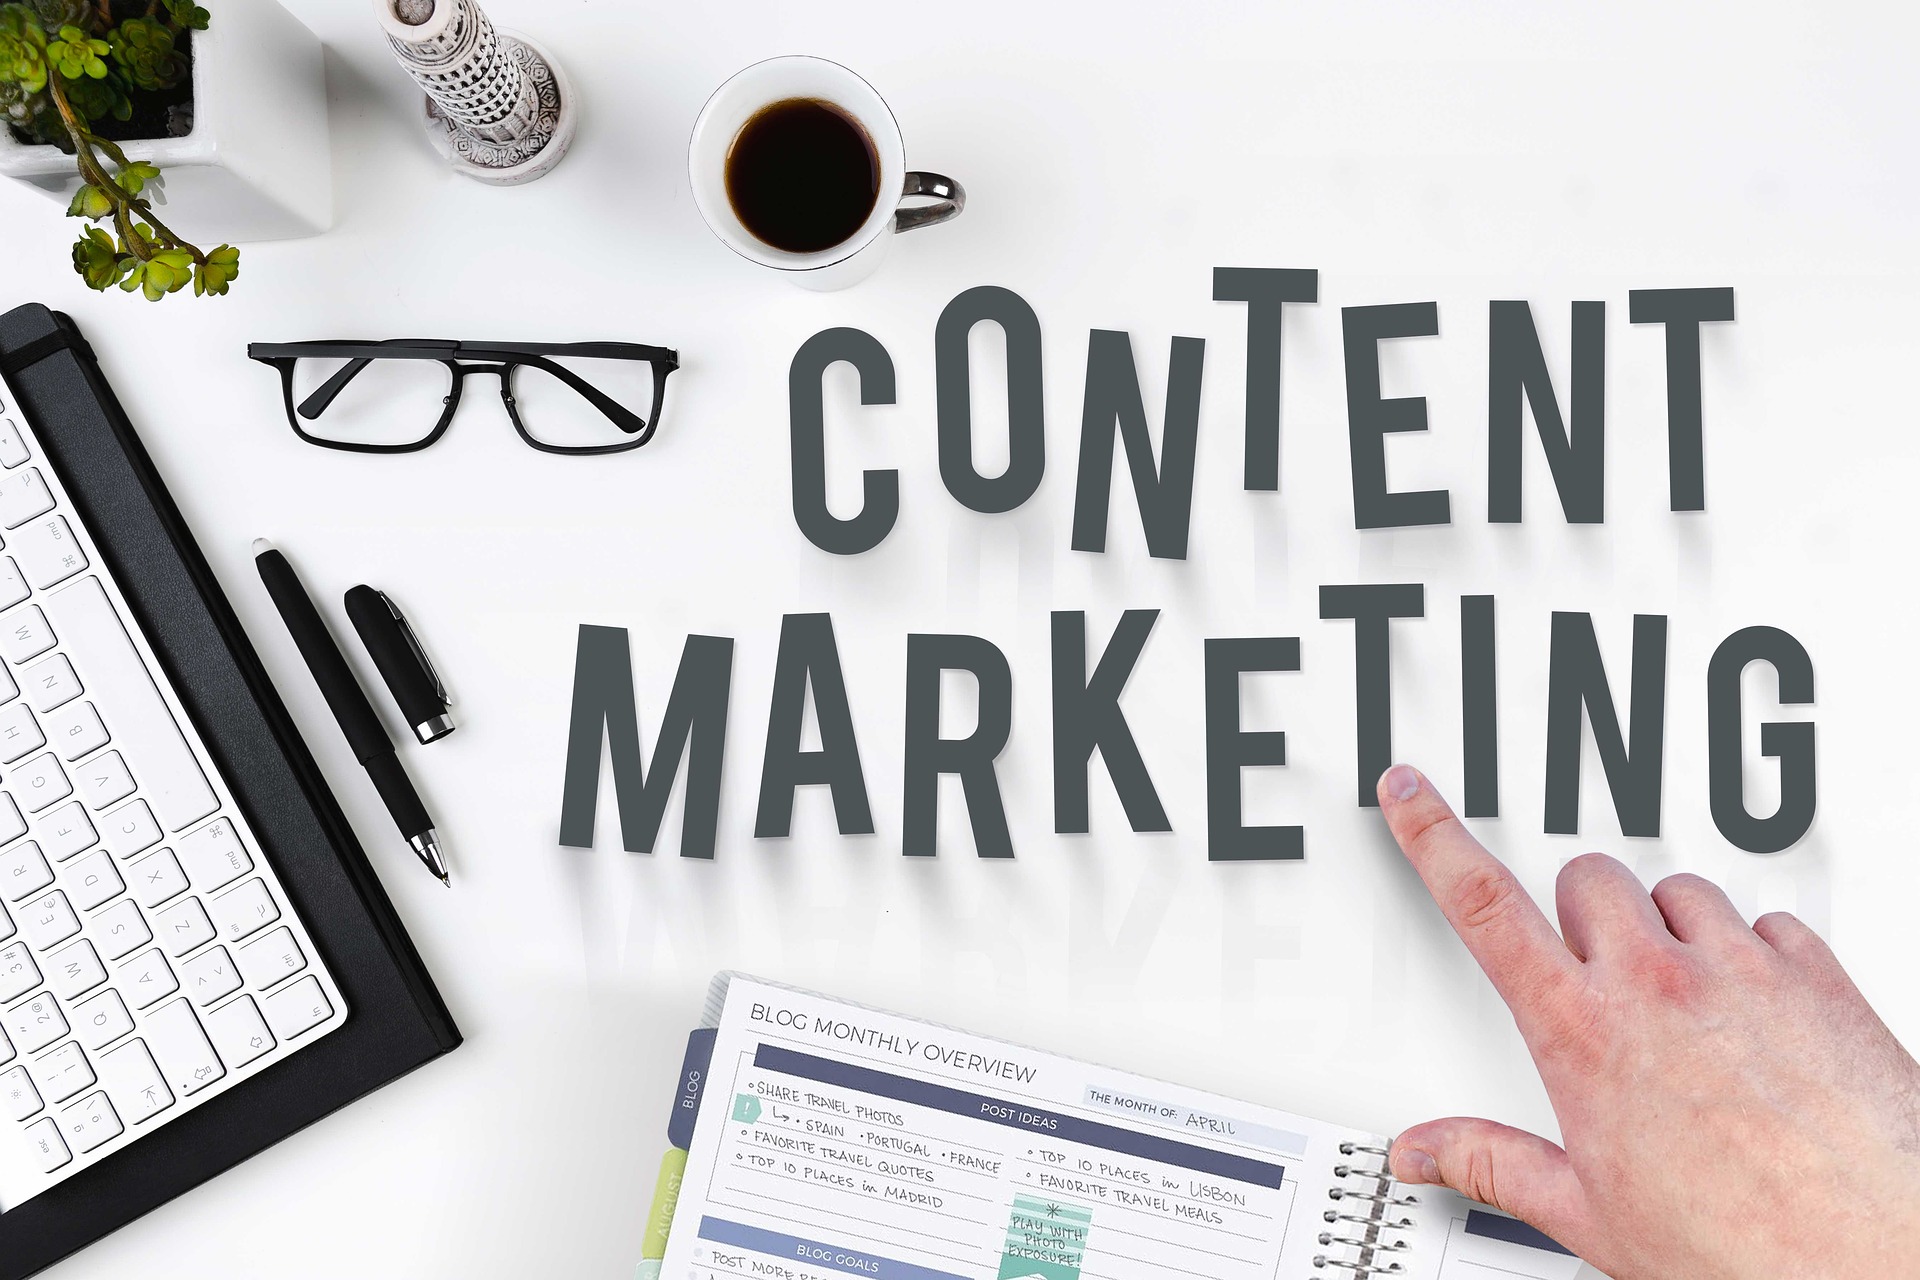 How to use content marketing to increase brand awareness